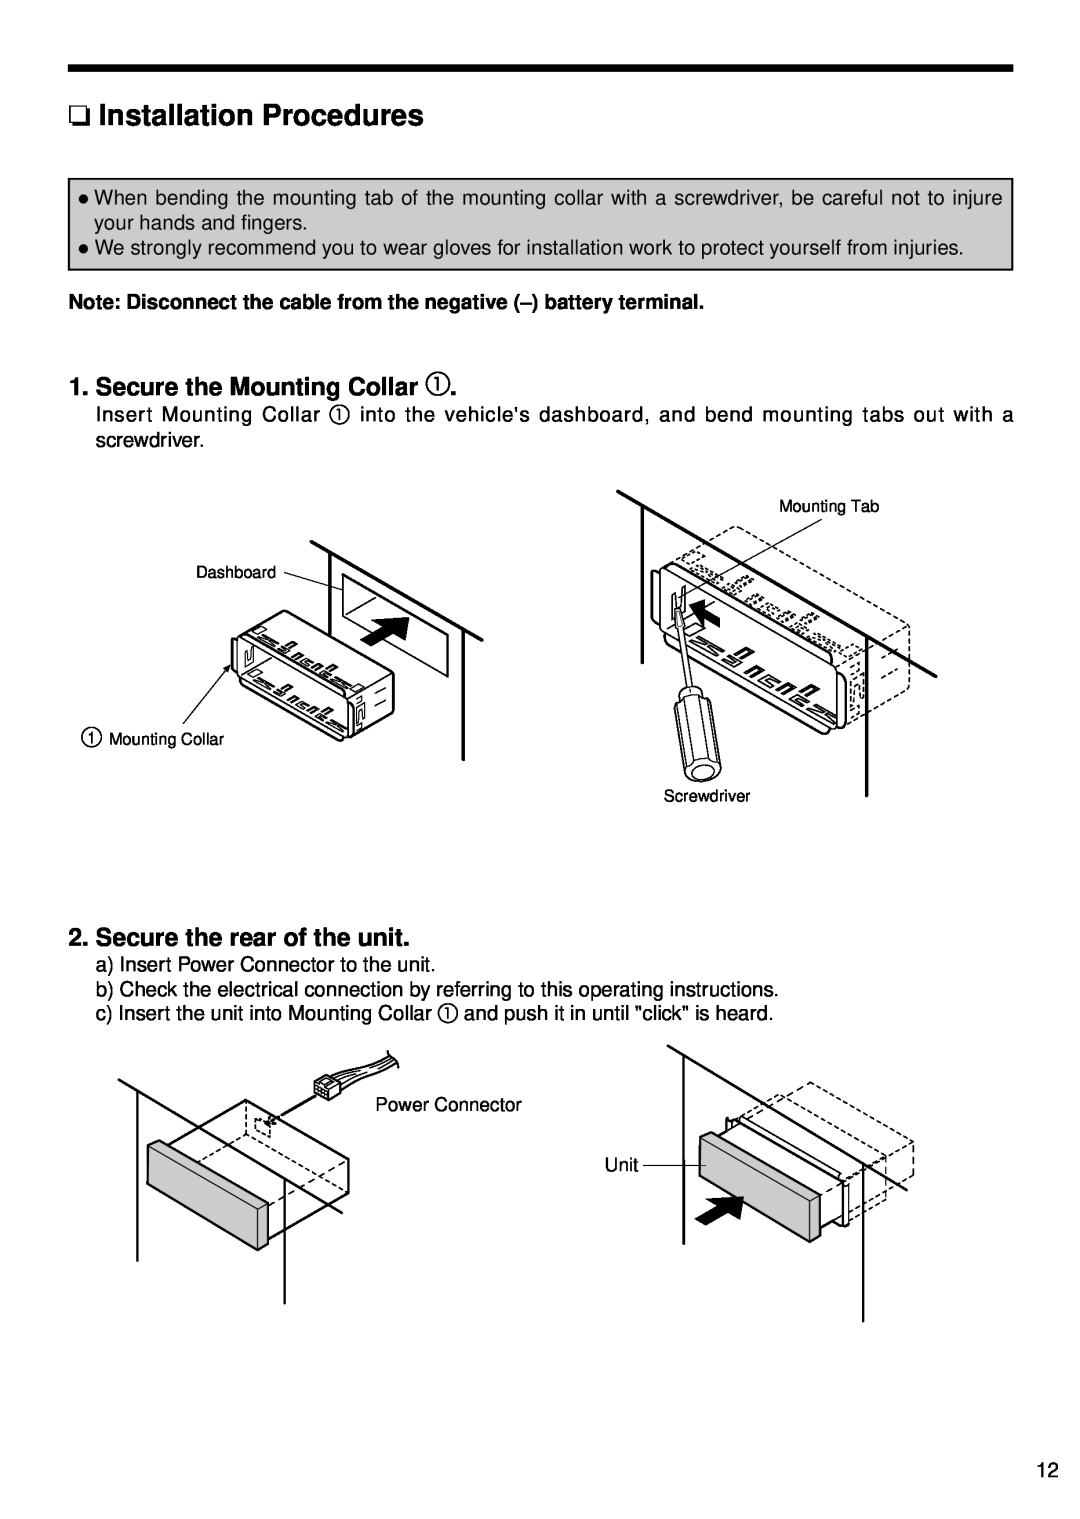 Panasonic CR-W400U operating instructions Installation Procedures, Secure the Mounting Collar, Secure the rear of the unit 